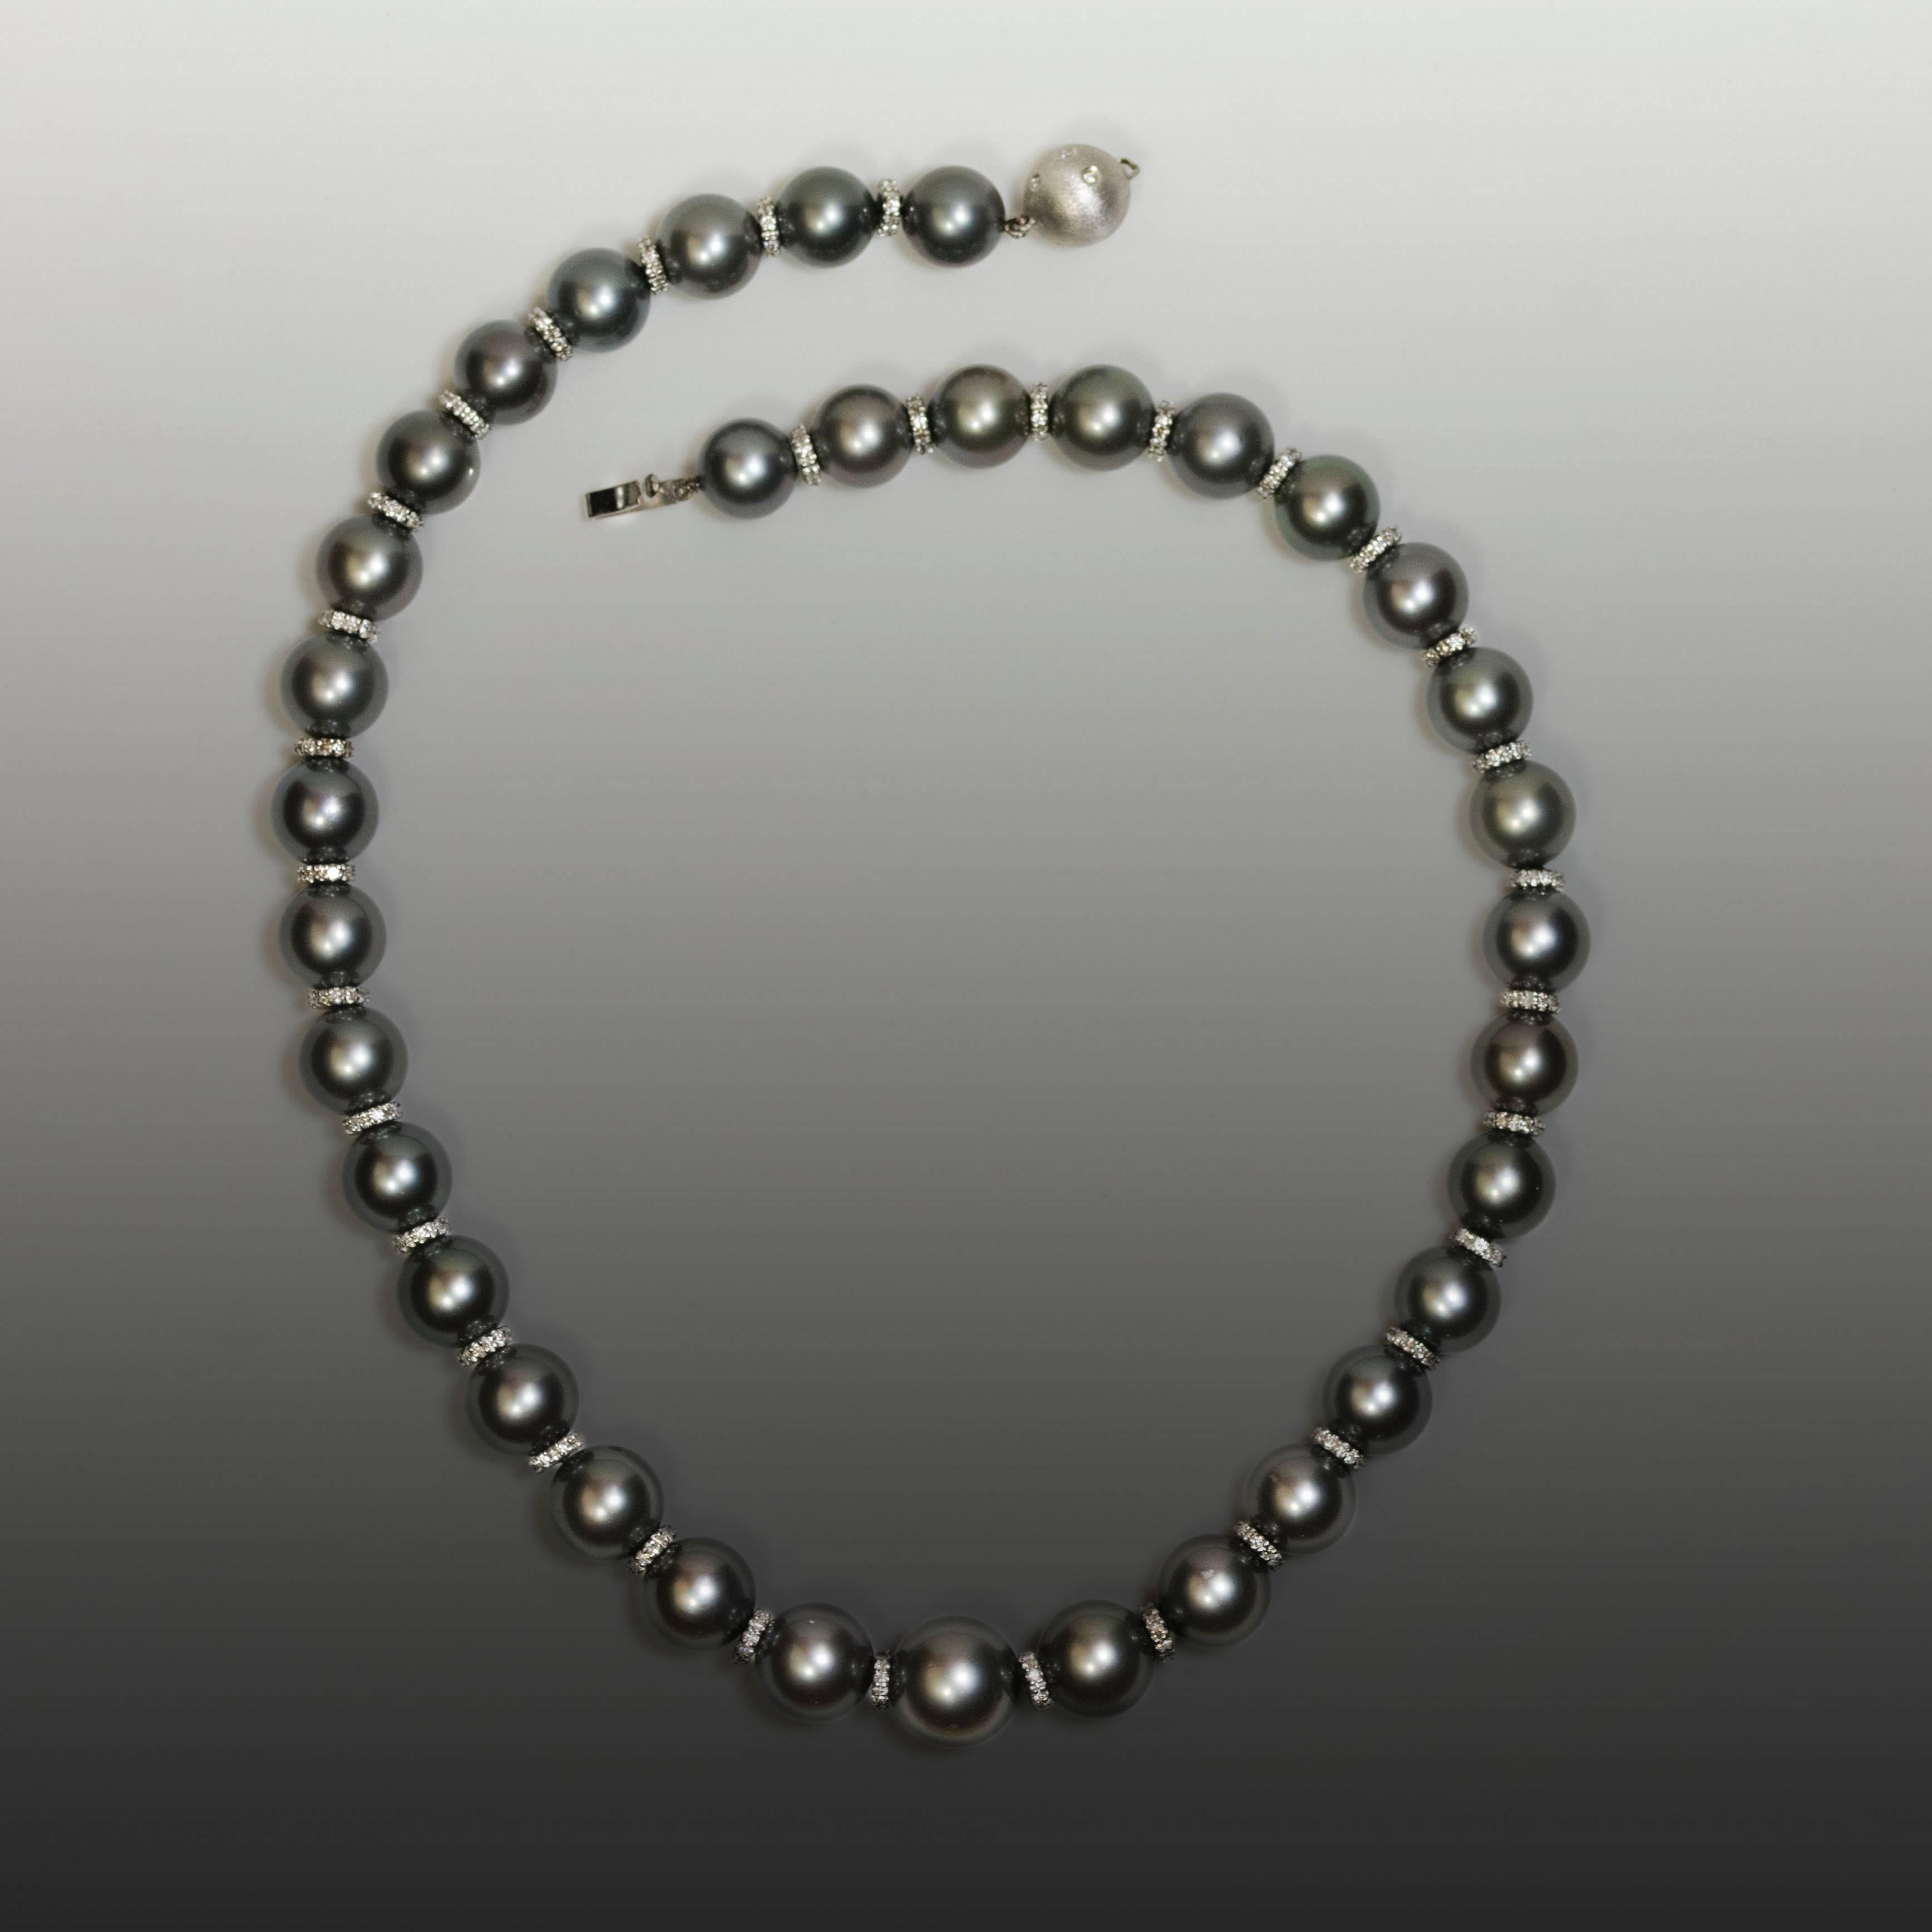 18k Necklace with 35 fine Tahitian Pearls graduating from 10mm to 13mm and separated by pave diamond rondel containing 2.15 carats of round brilliant diamonds.